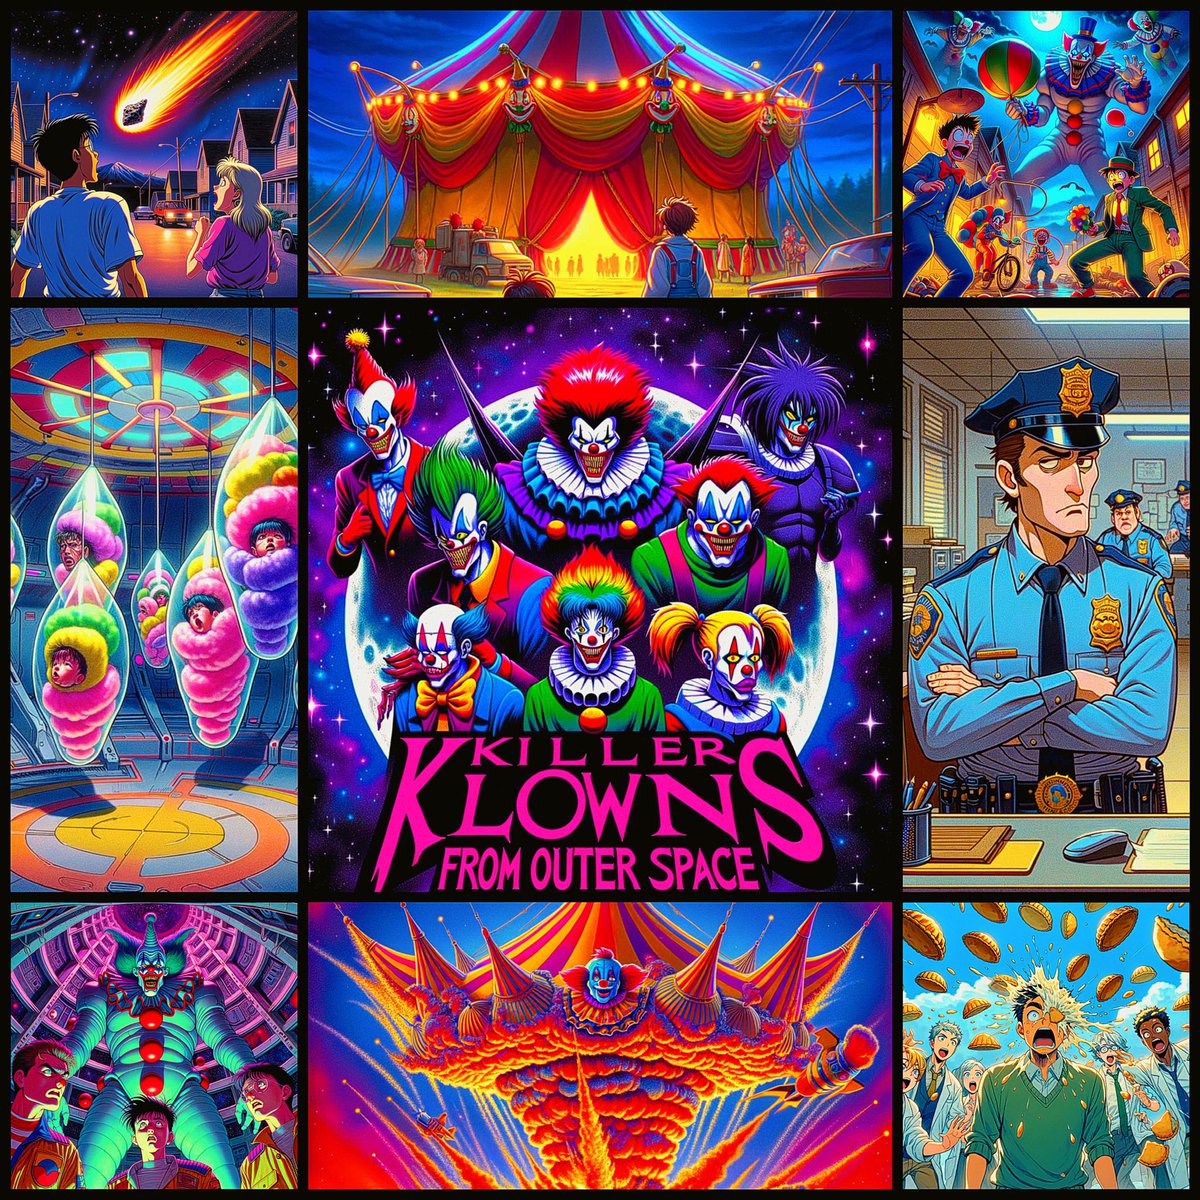 I turned some modern movies into an anime series using Midjourney V6 Halloween, The Shining, Brave Heart and Killer Klowns From Outer Space #AIArtwork #Anime #Halloween #Braveheart #Theshining #KillerKlownsFromOuterSpace